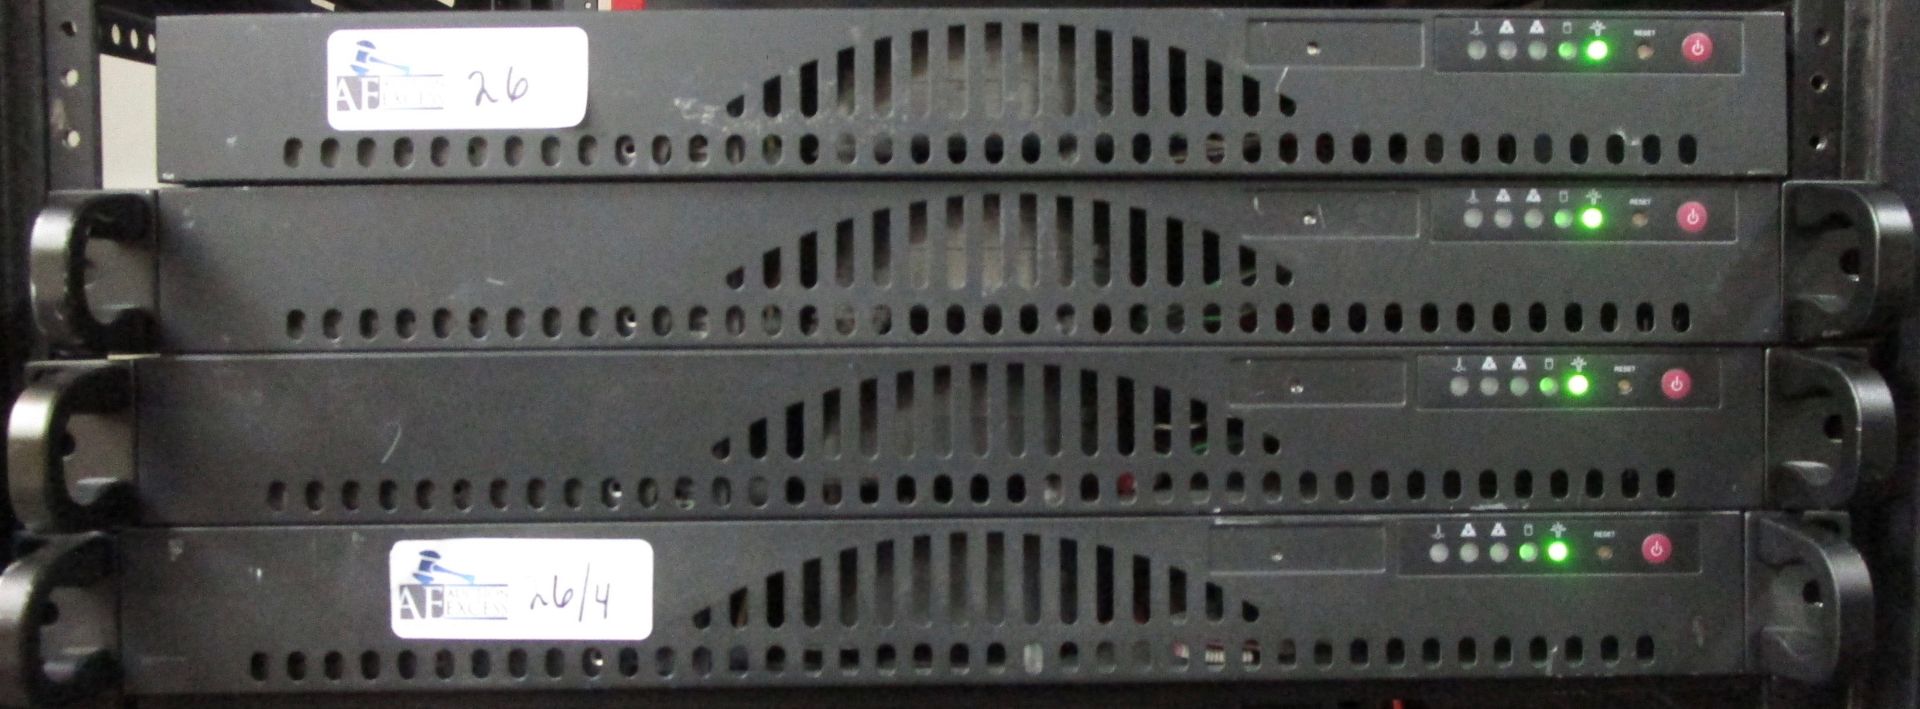 LOT OF 4 3Y POWER TECHNOLOGY SERVERS